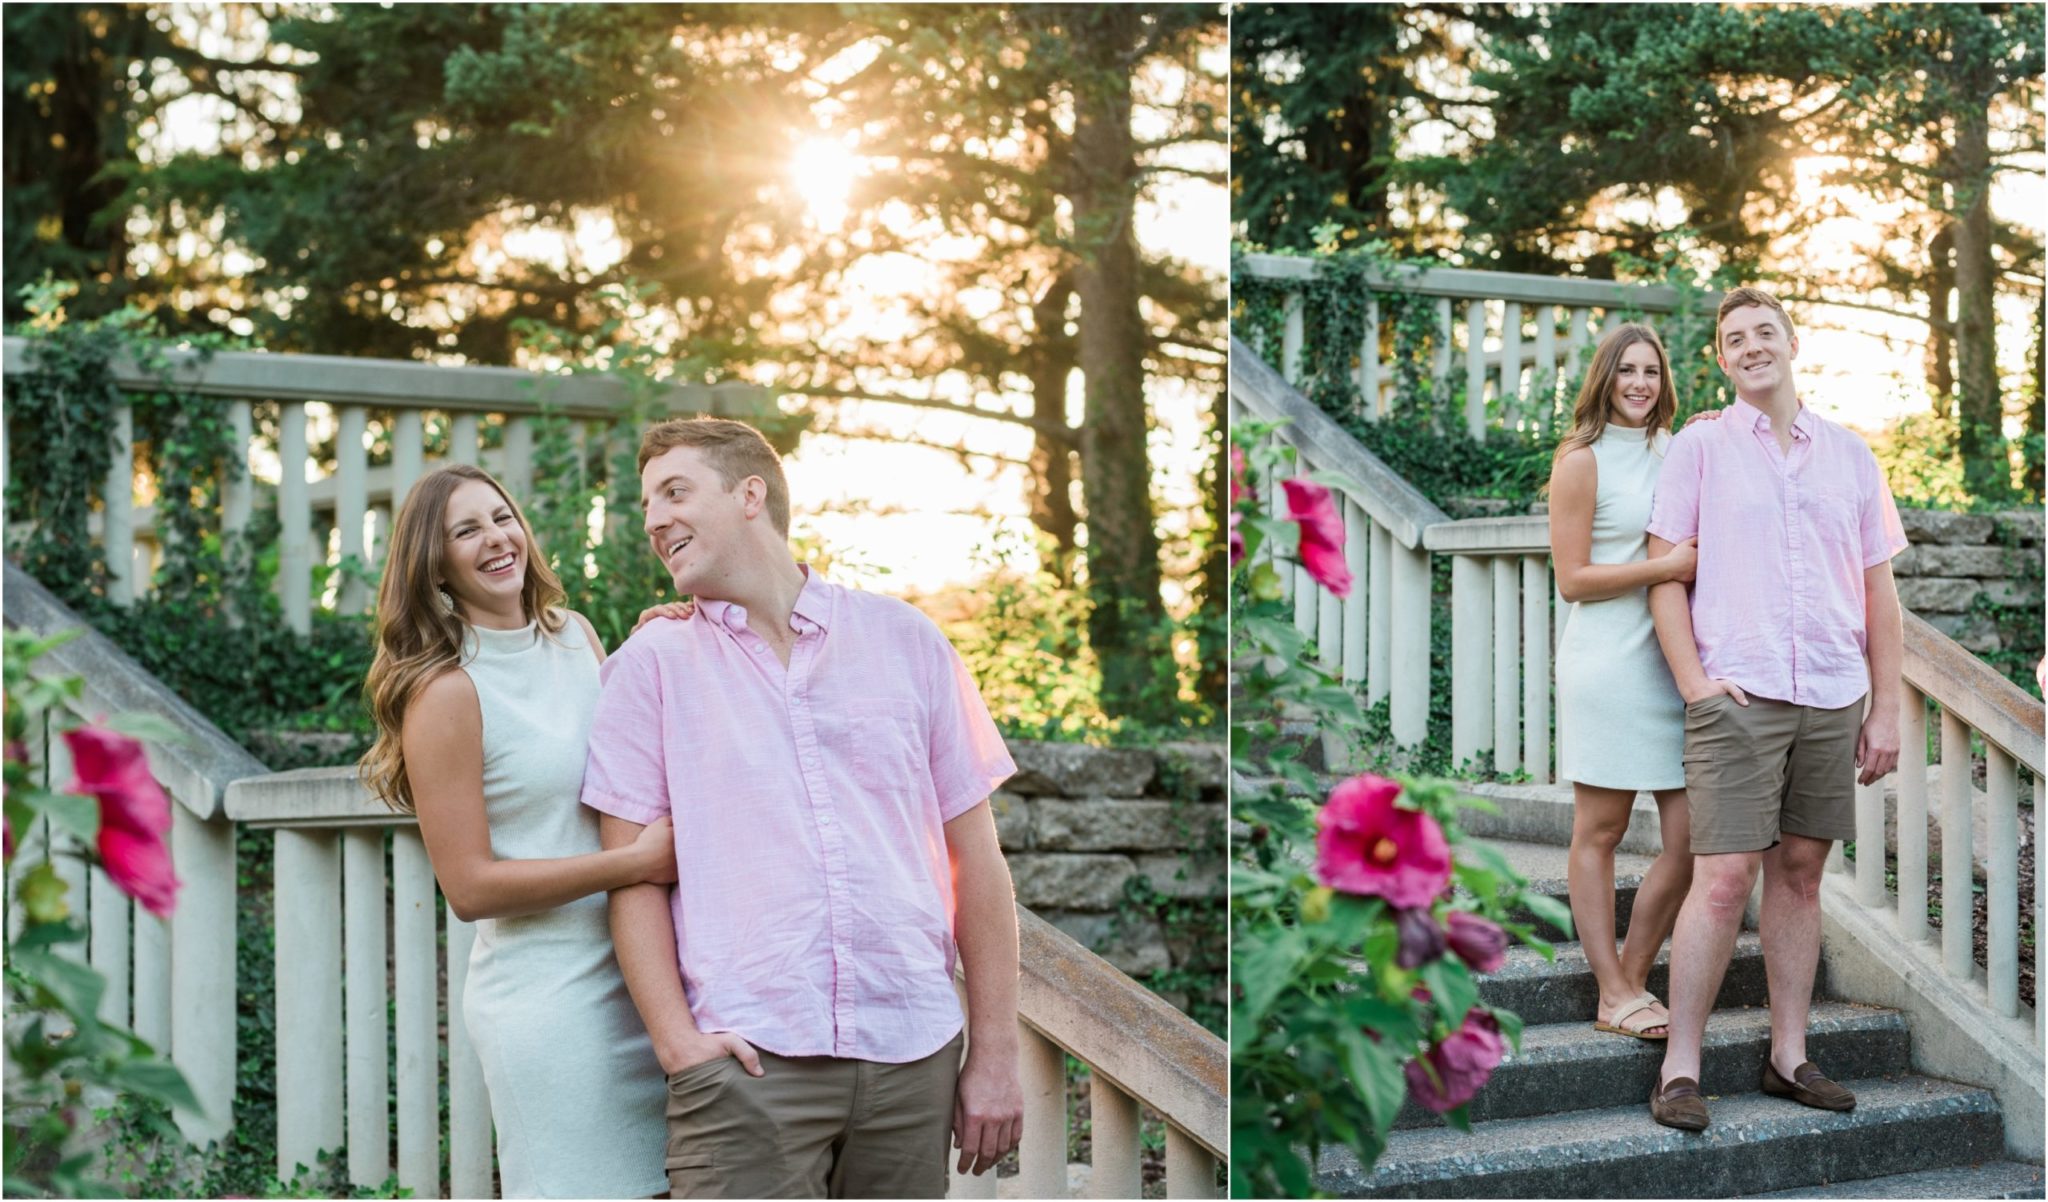 Collage image of a couple posing on steps in a rose garden.